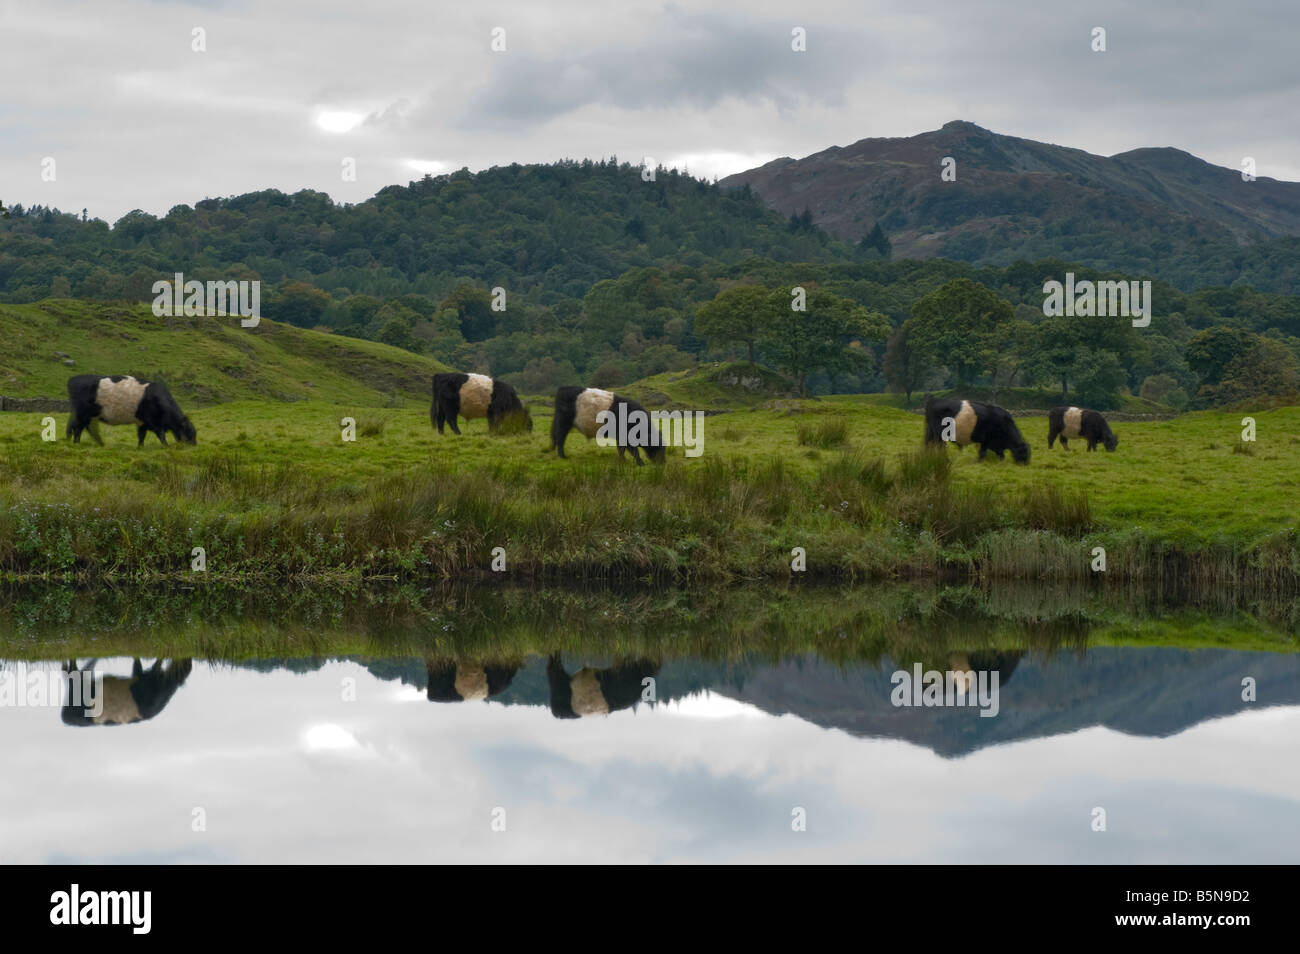 A slow exposure captures five Belted Galloway cattle moving through this reflected image. Stock Photo